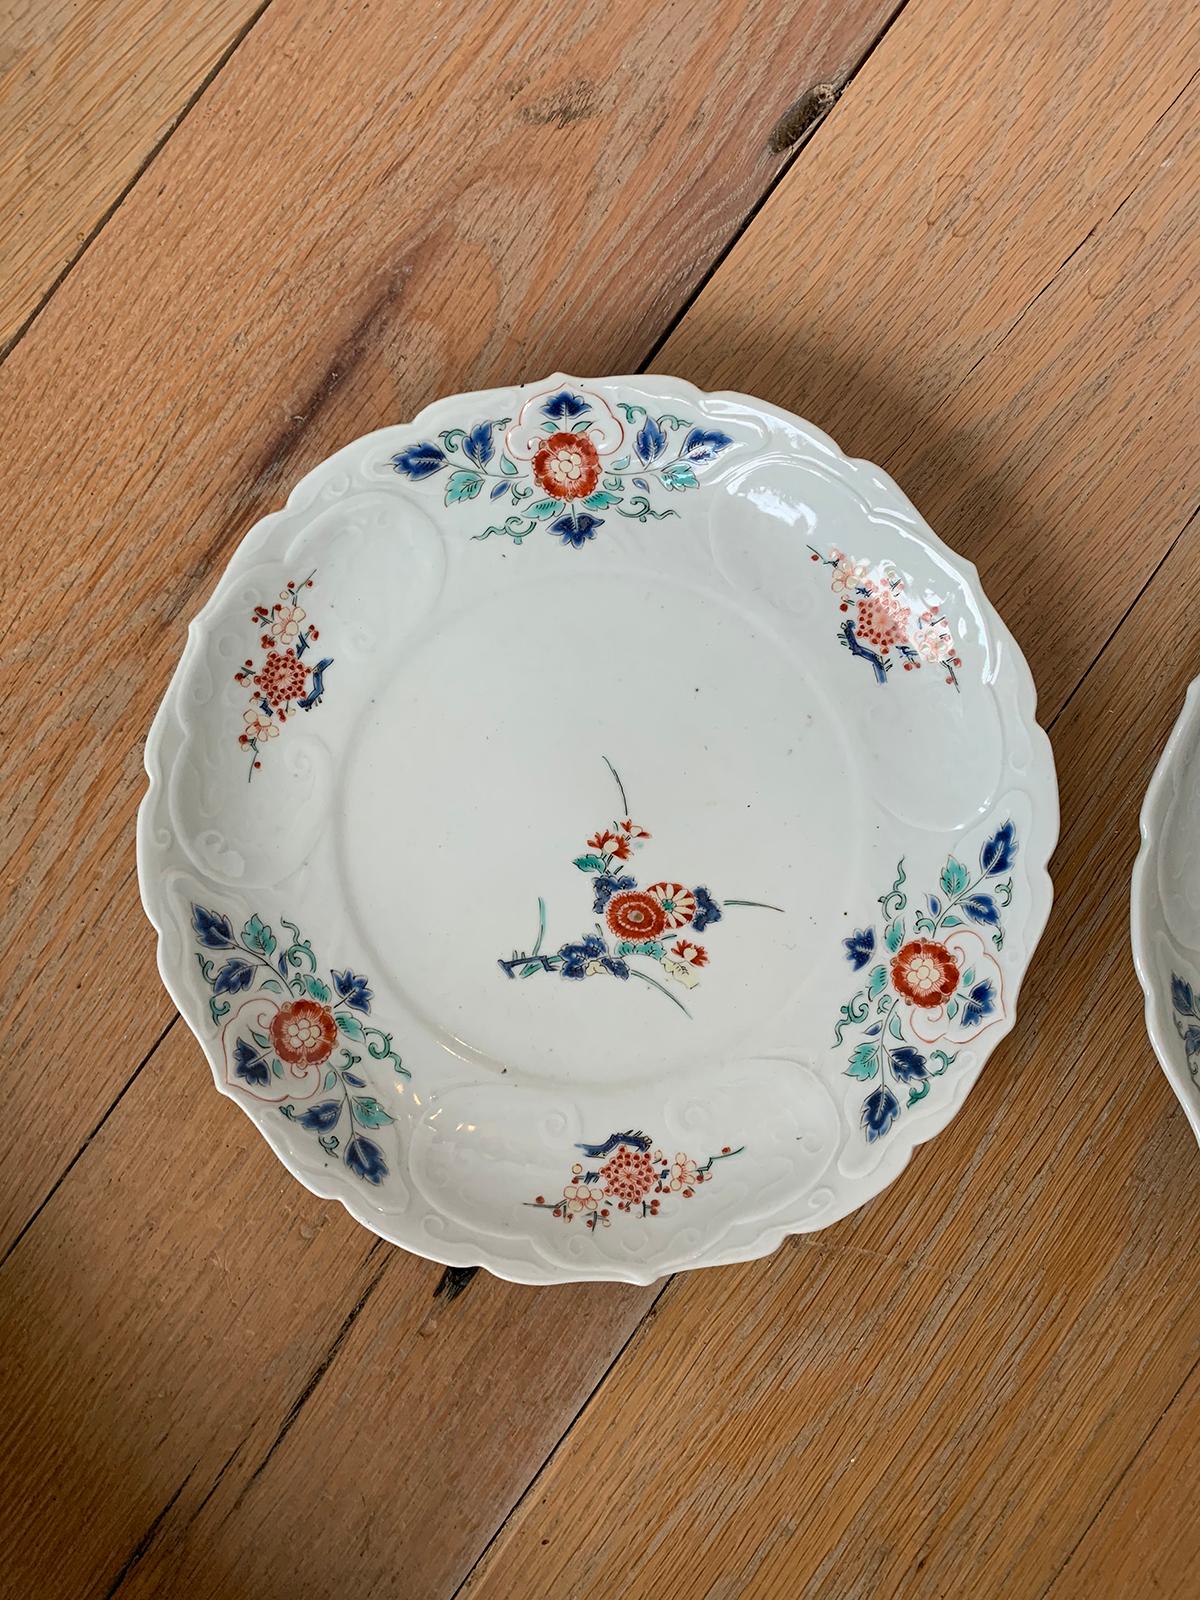 Pair of 19th Century Floral Round Porcelain Plates with Scalloped Edge, Unmarked For Sale 4